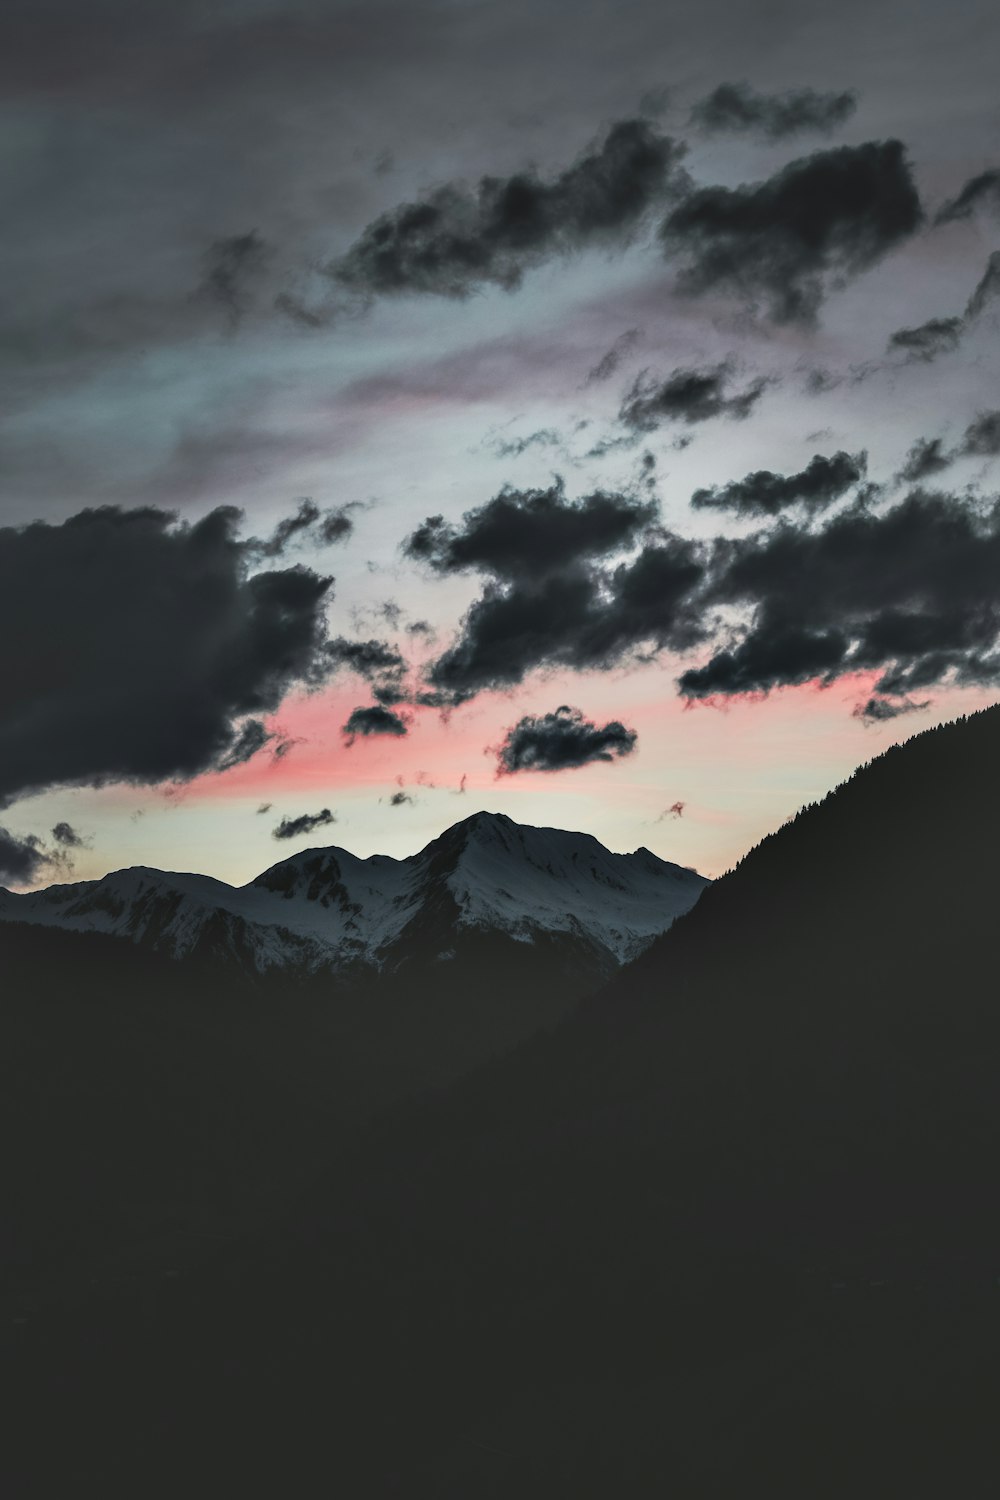 silhouette of mountain under cloudy sky